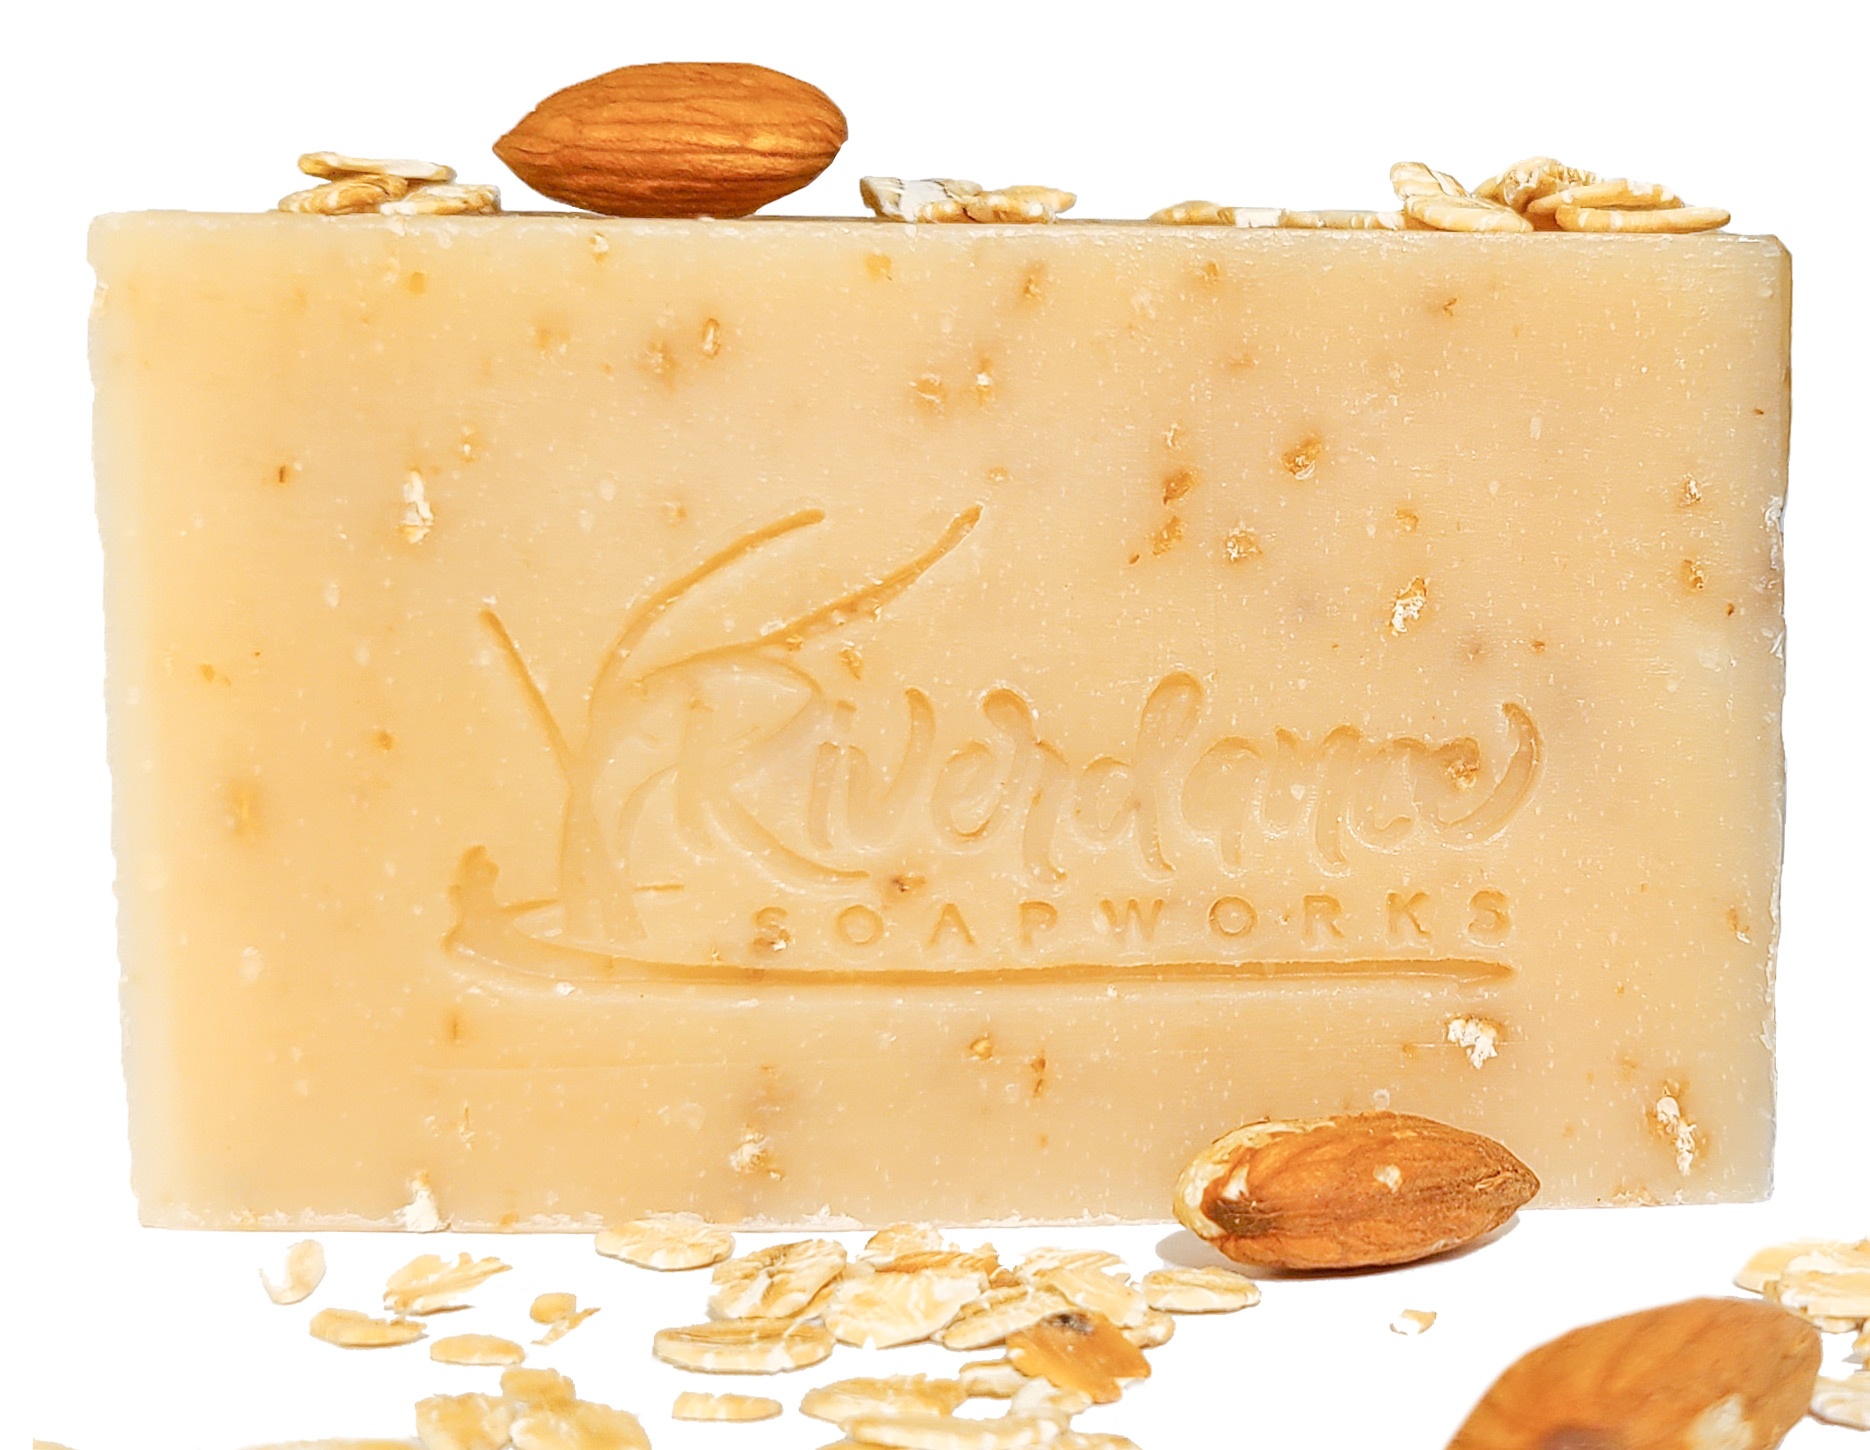 almond oatmeal goat milk soap product image